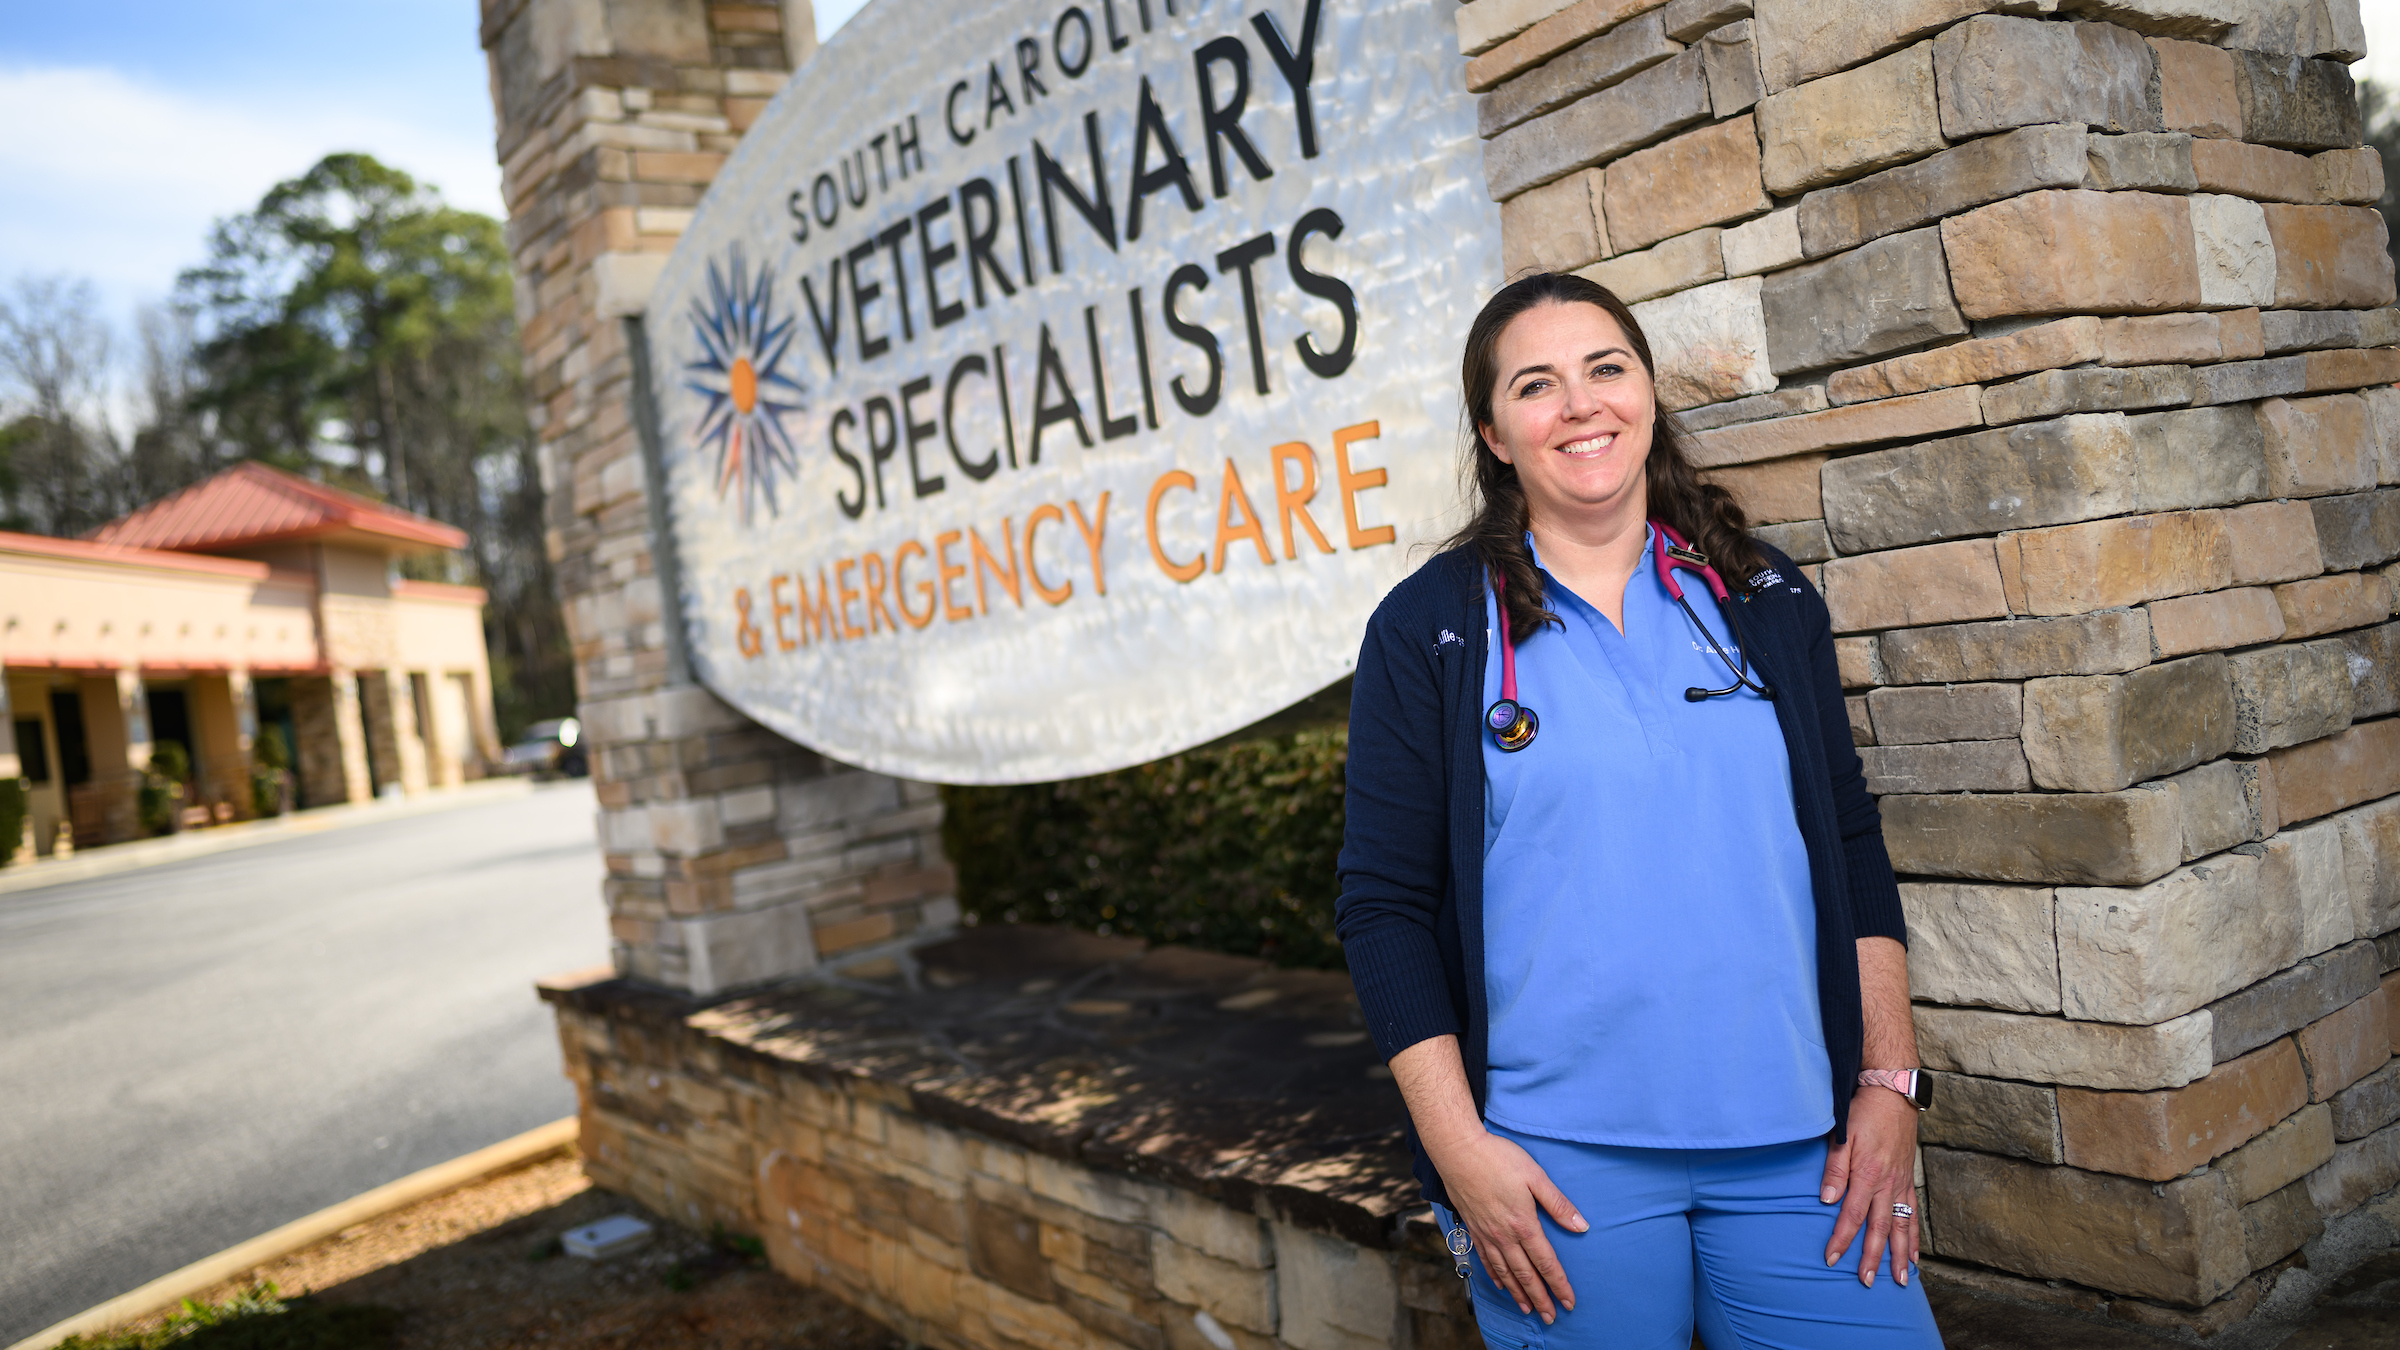 A brunette female veterinarian in light blue scrubs stands in front of the sign for her practice in South Carolina.